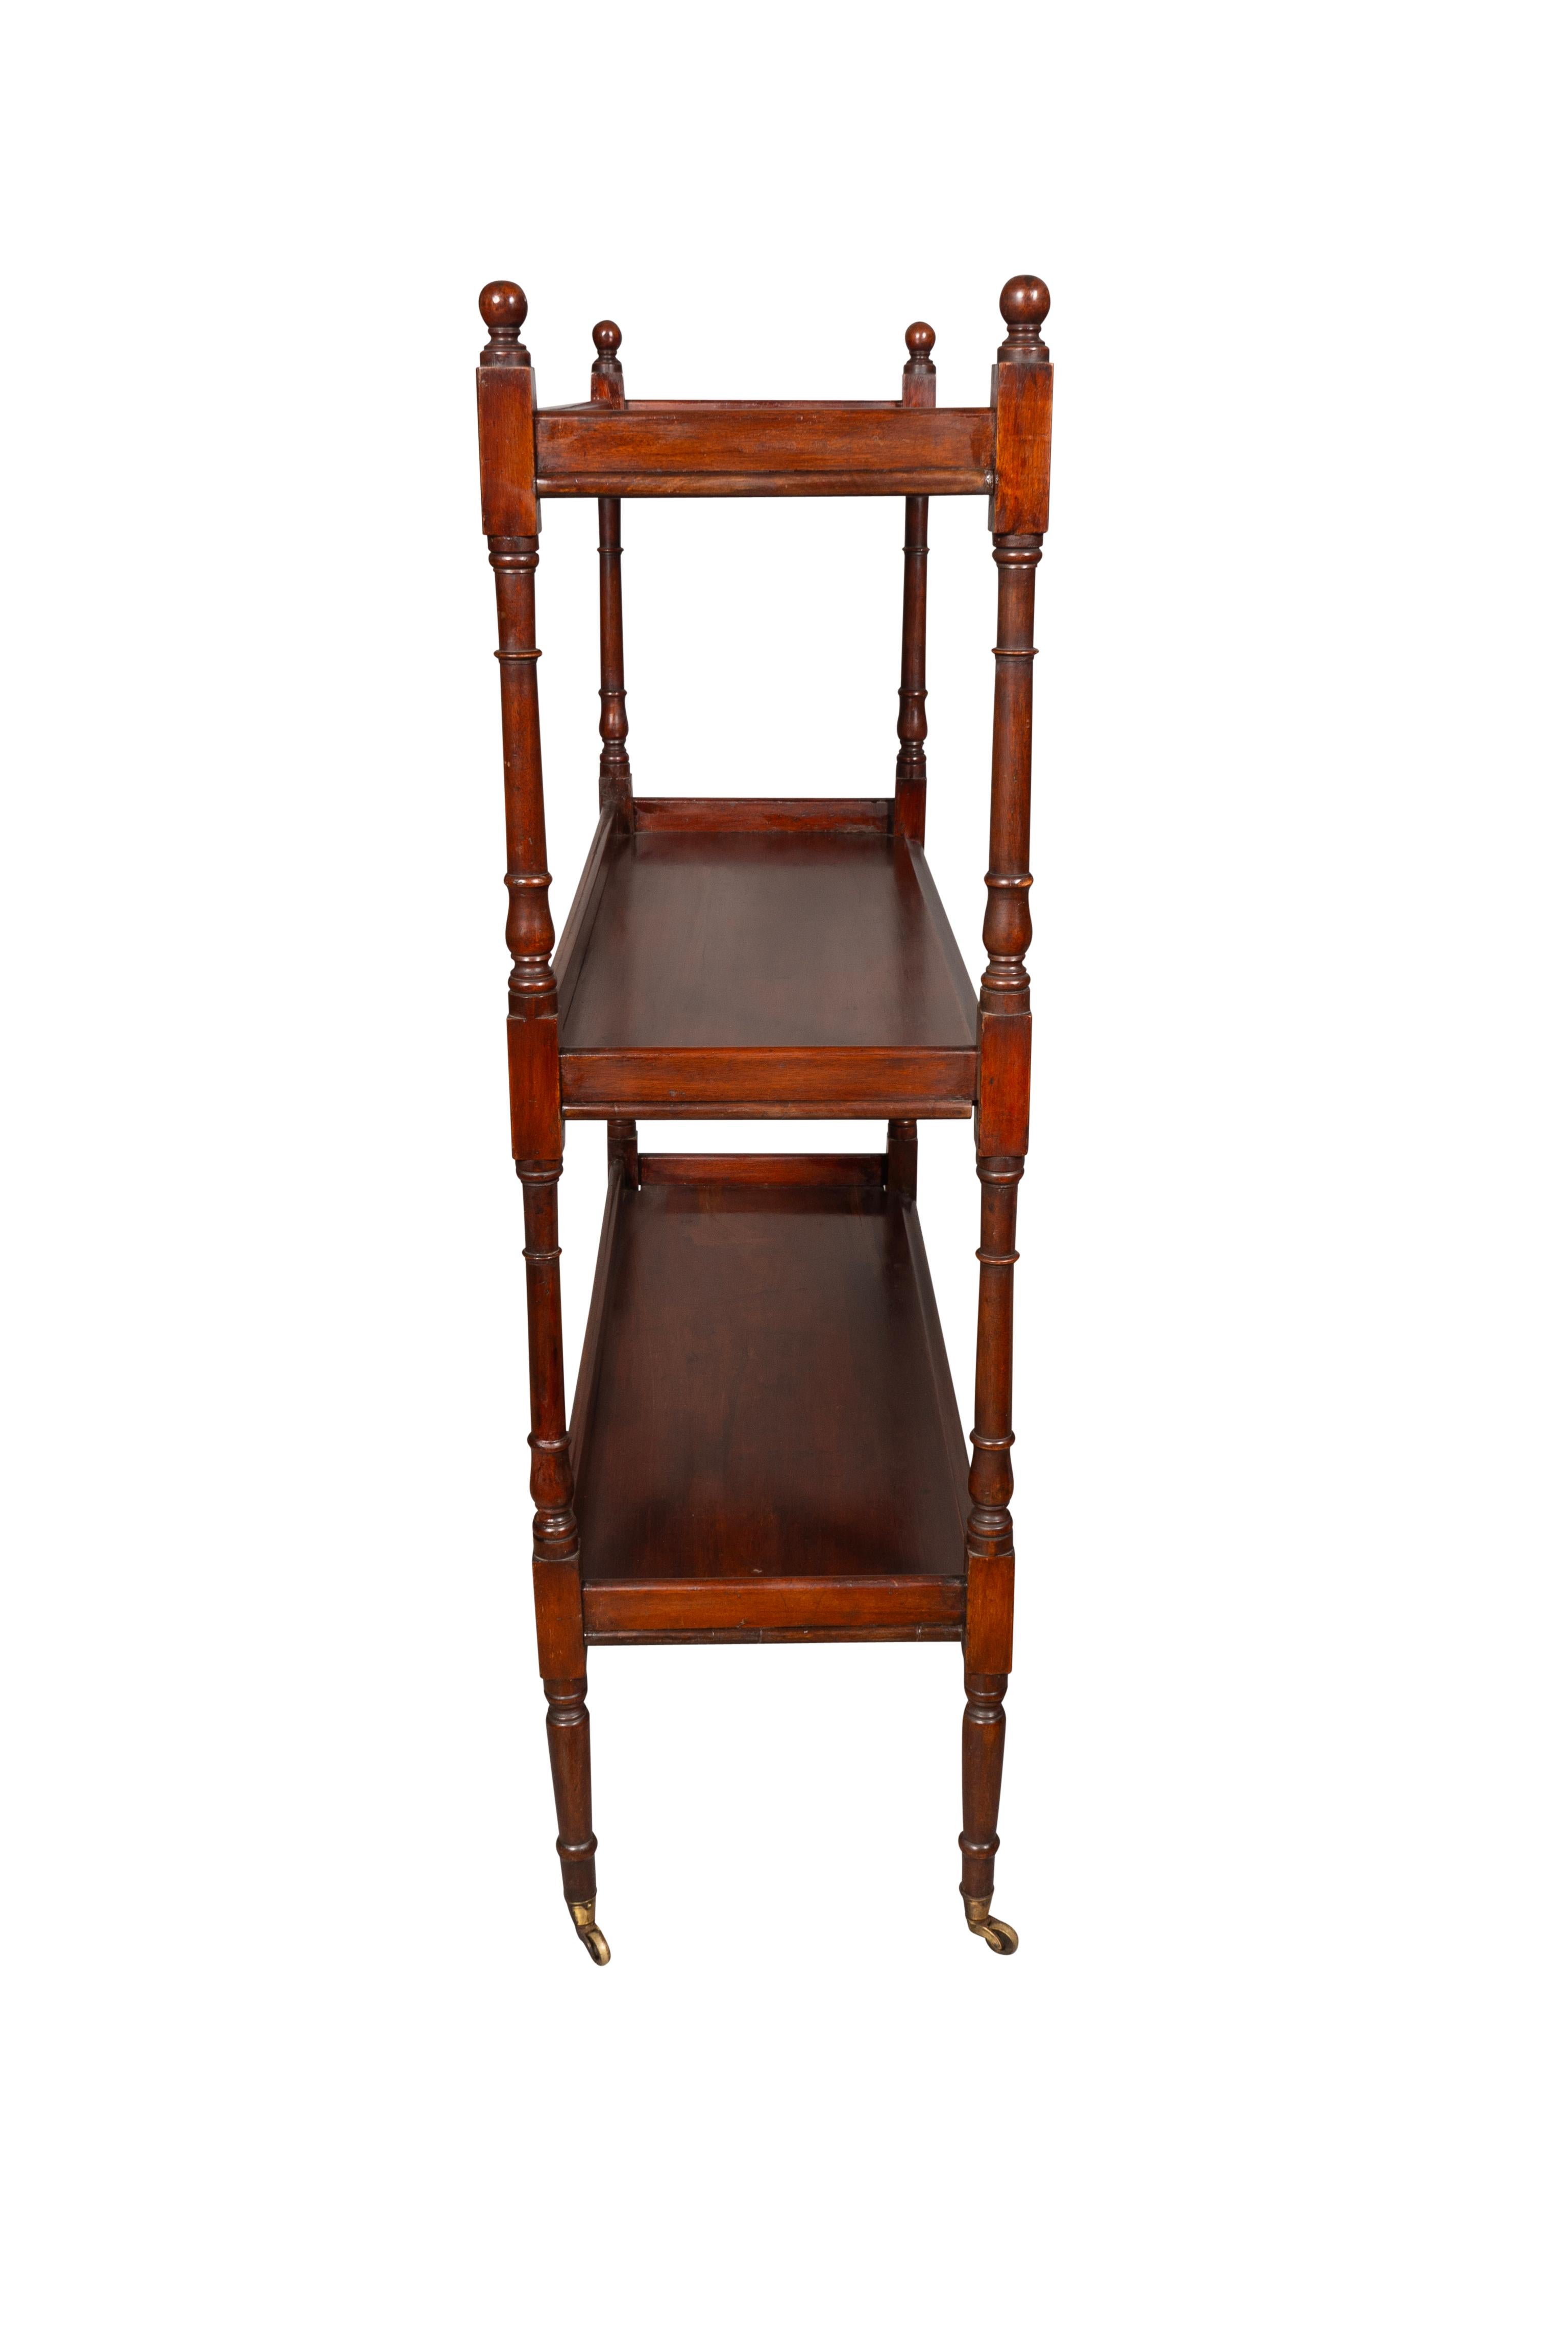 George III Mahogany Etagere In Good Condition For Sale In Essex, MA